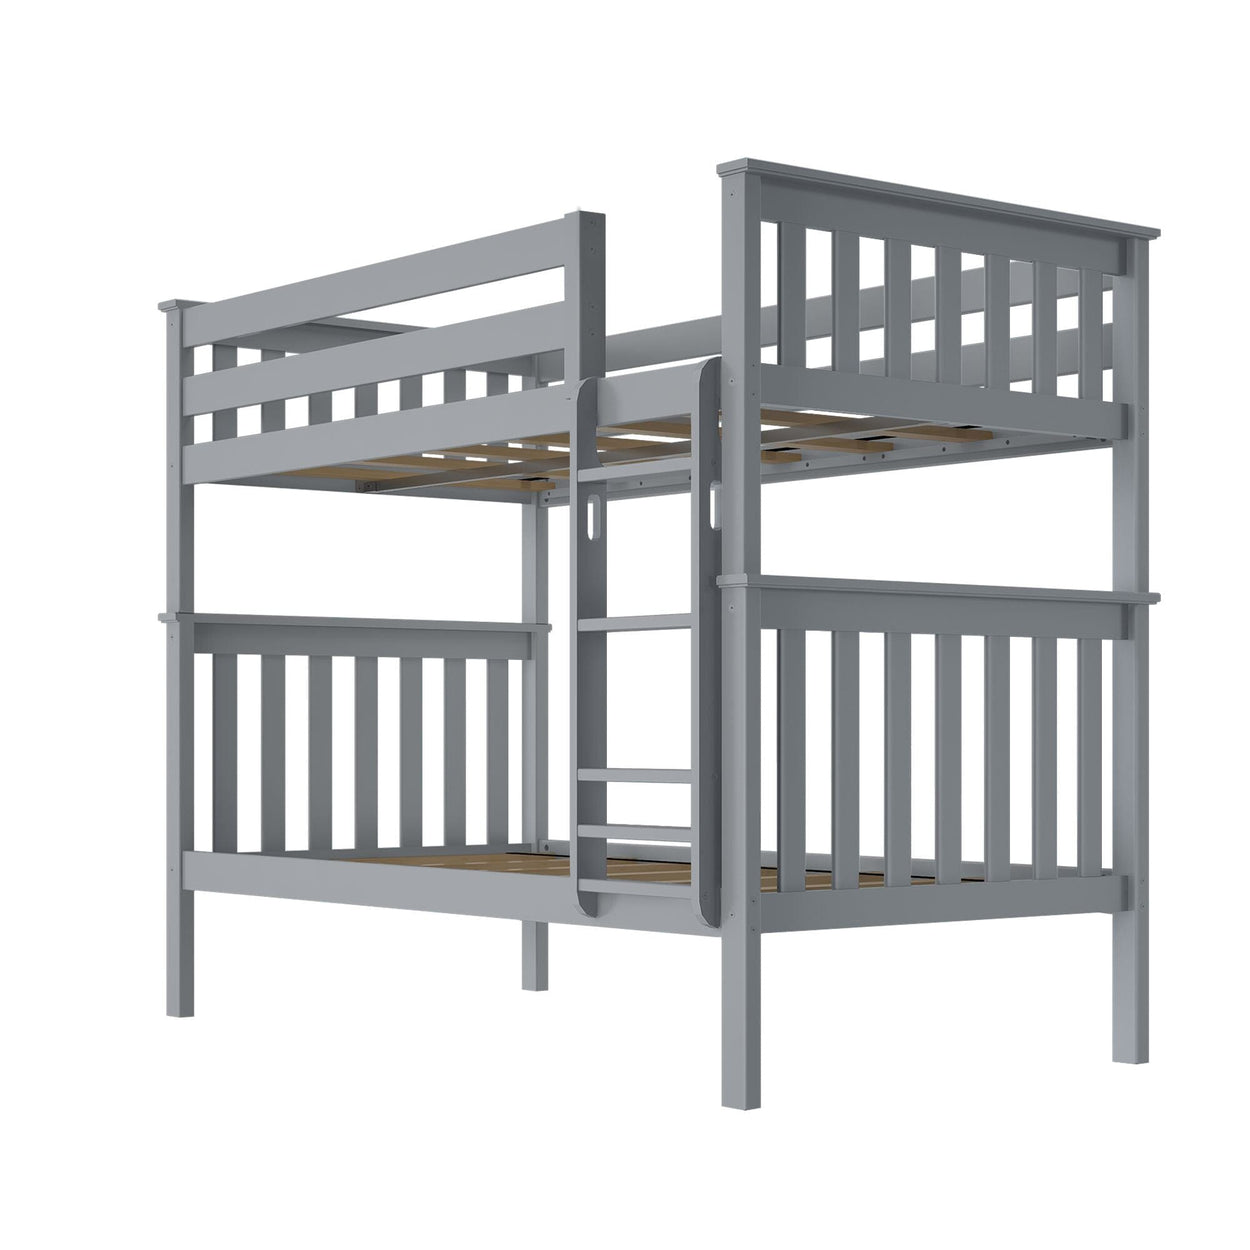 180201-121 : Bunk Beds Classic Twin over Twin Bunk Bed, Grey